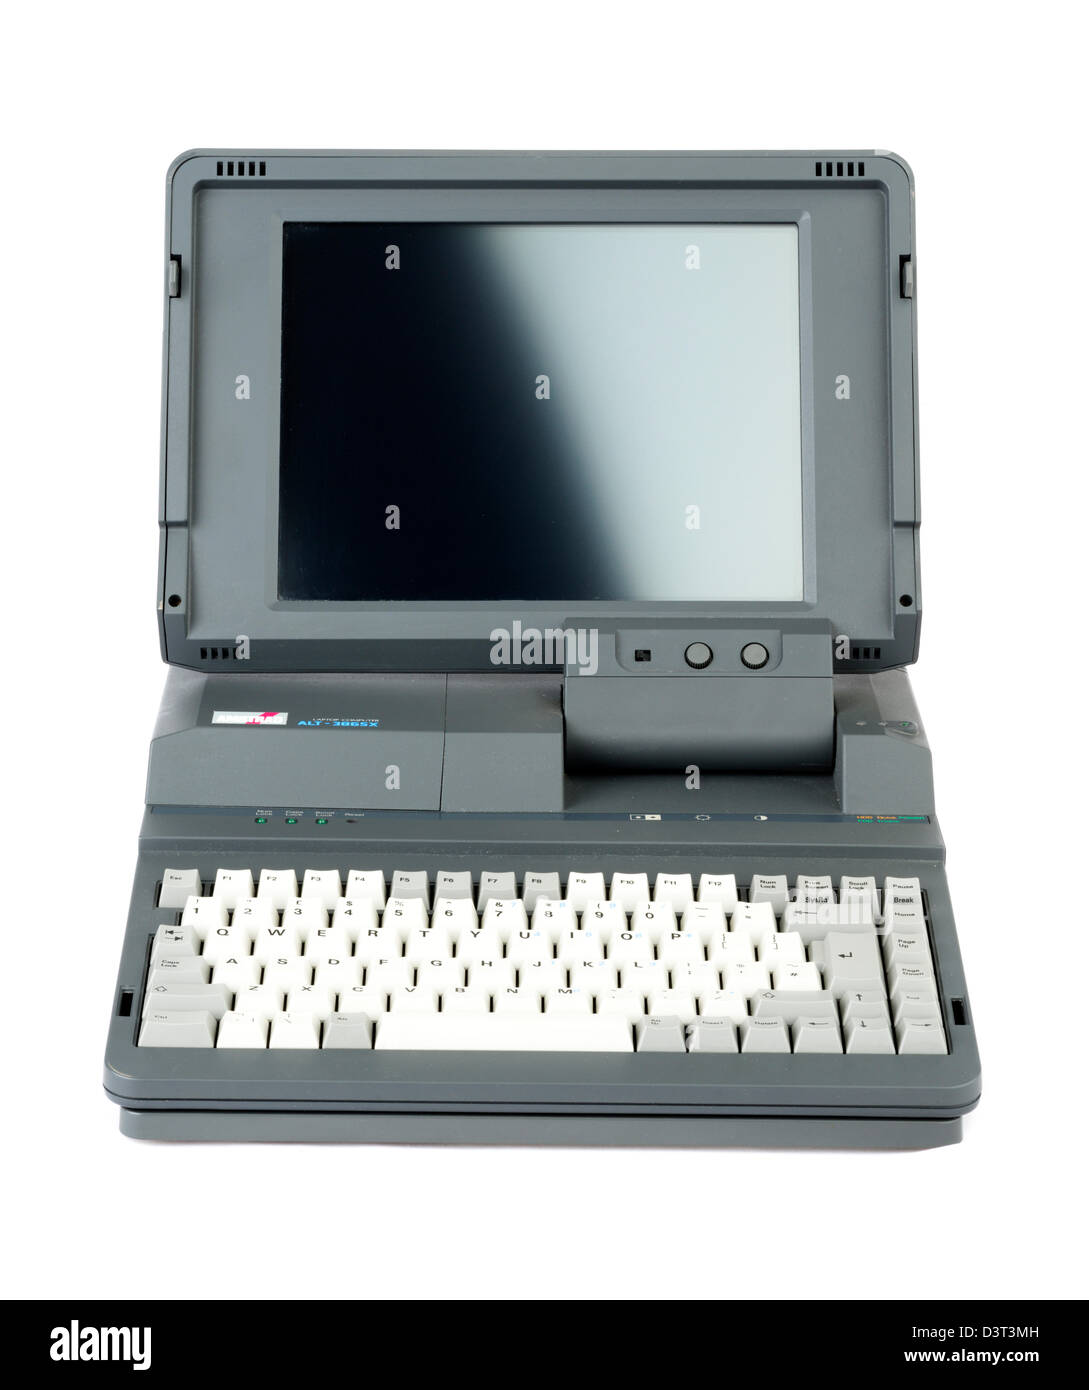 An old Amstrad Alt-386SX laptop computer, one of the first affordable portable computers launched in 1988 Stock Photo